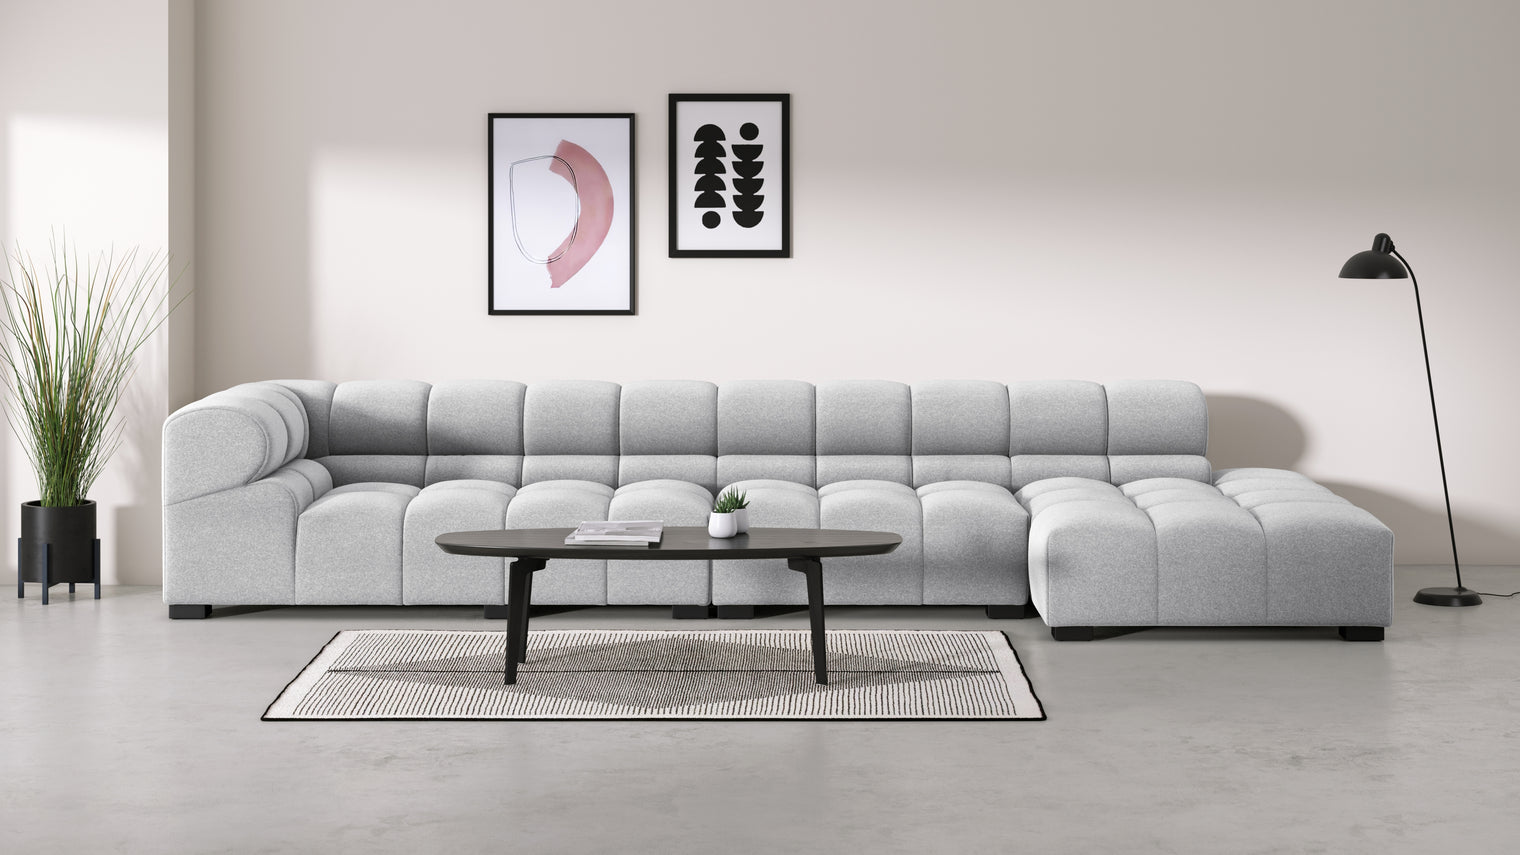 Modular Masterpiece | A modern take on 70s design, this cloud-like sectional is all about leisurely lounging. Its relaxed, playful aesthetic is adored around the world.
